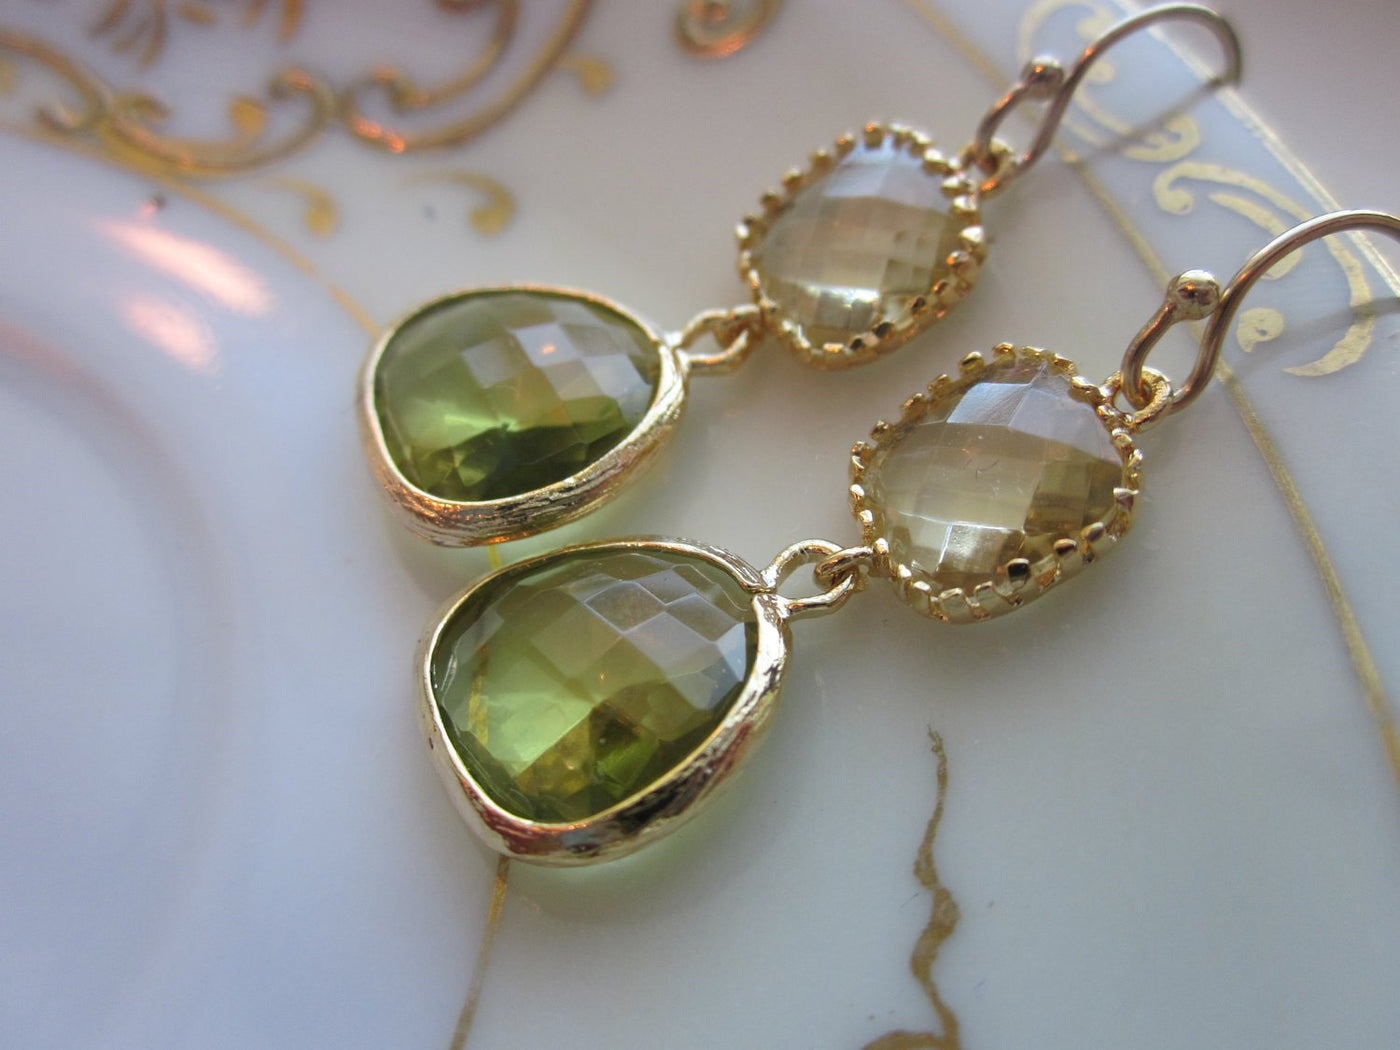 Peridot and Citrine Earrings - Corinne an Affordable Women's Clothing Boutique in the US USA